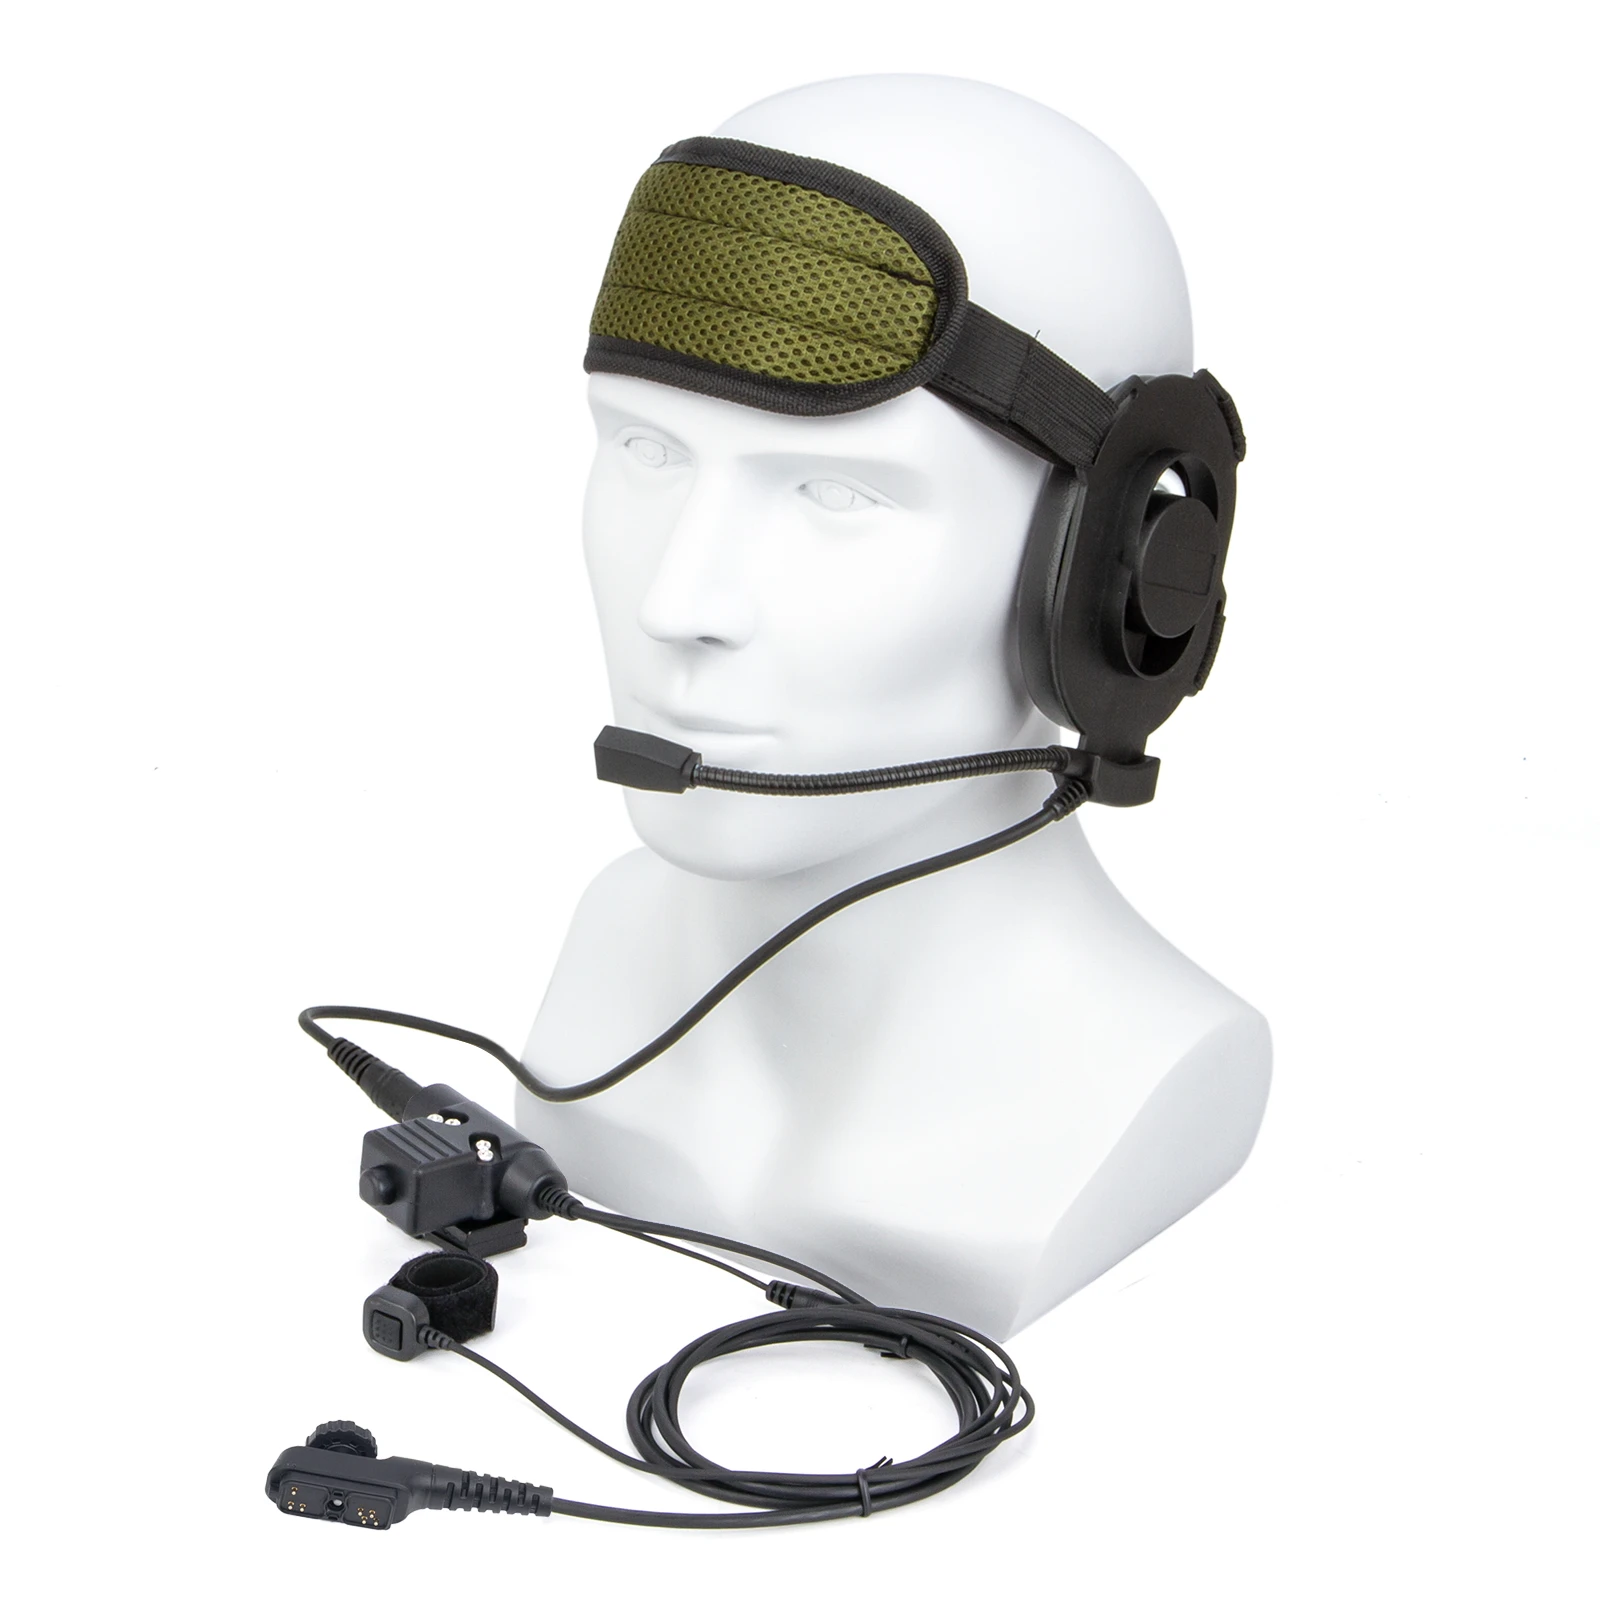 U94 PTT and Finger Microphone PTT with black HD01 Tactical Bowman Elite II Radio Headset Earpiece for Hytera PD780